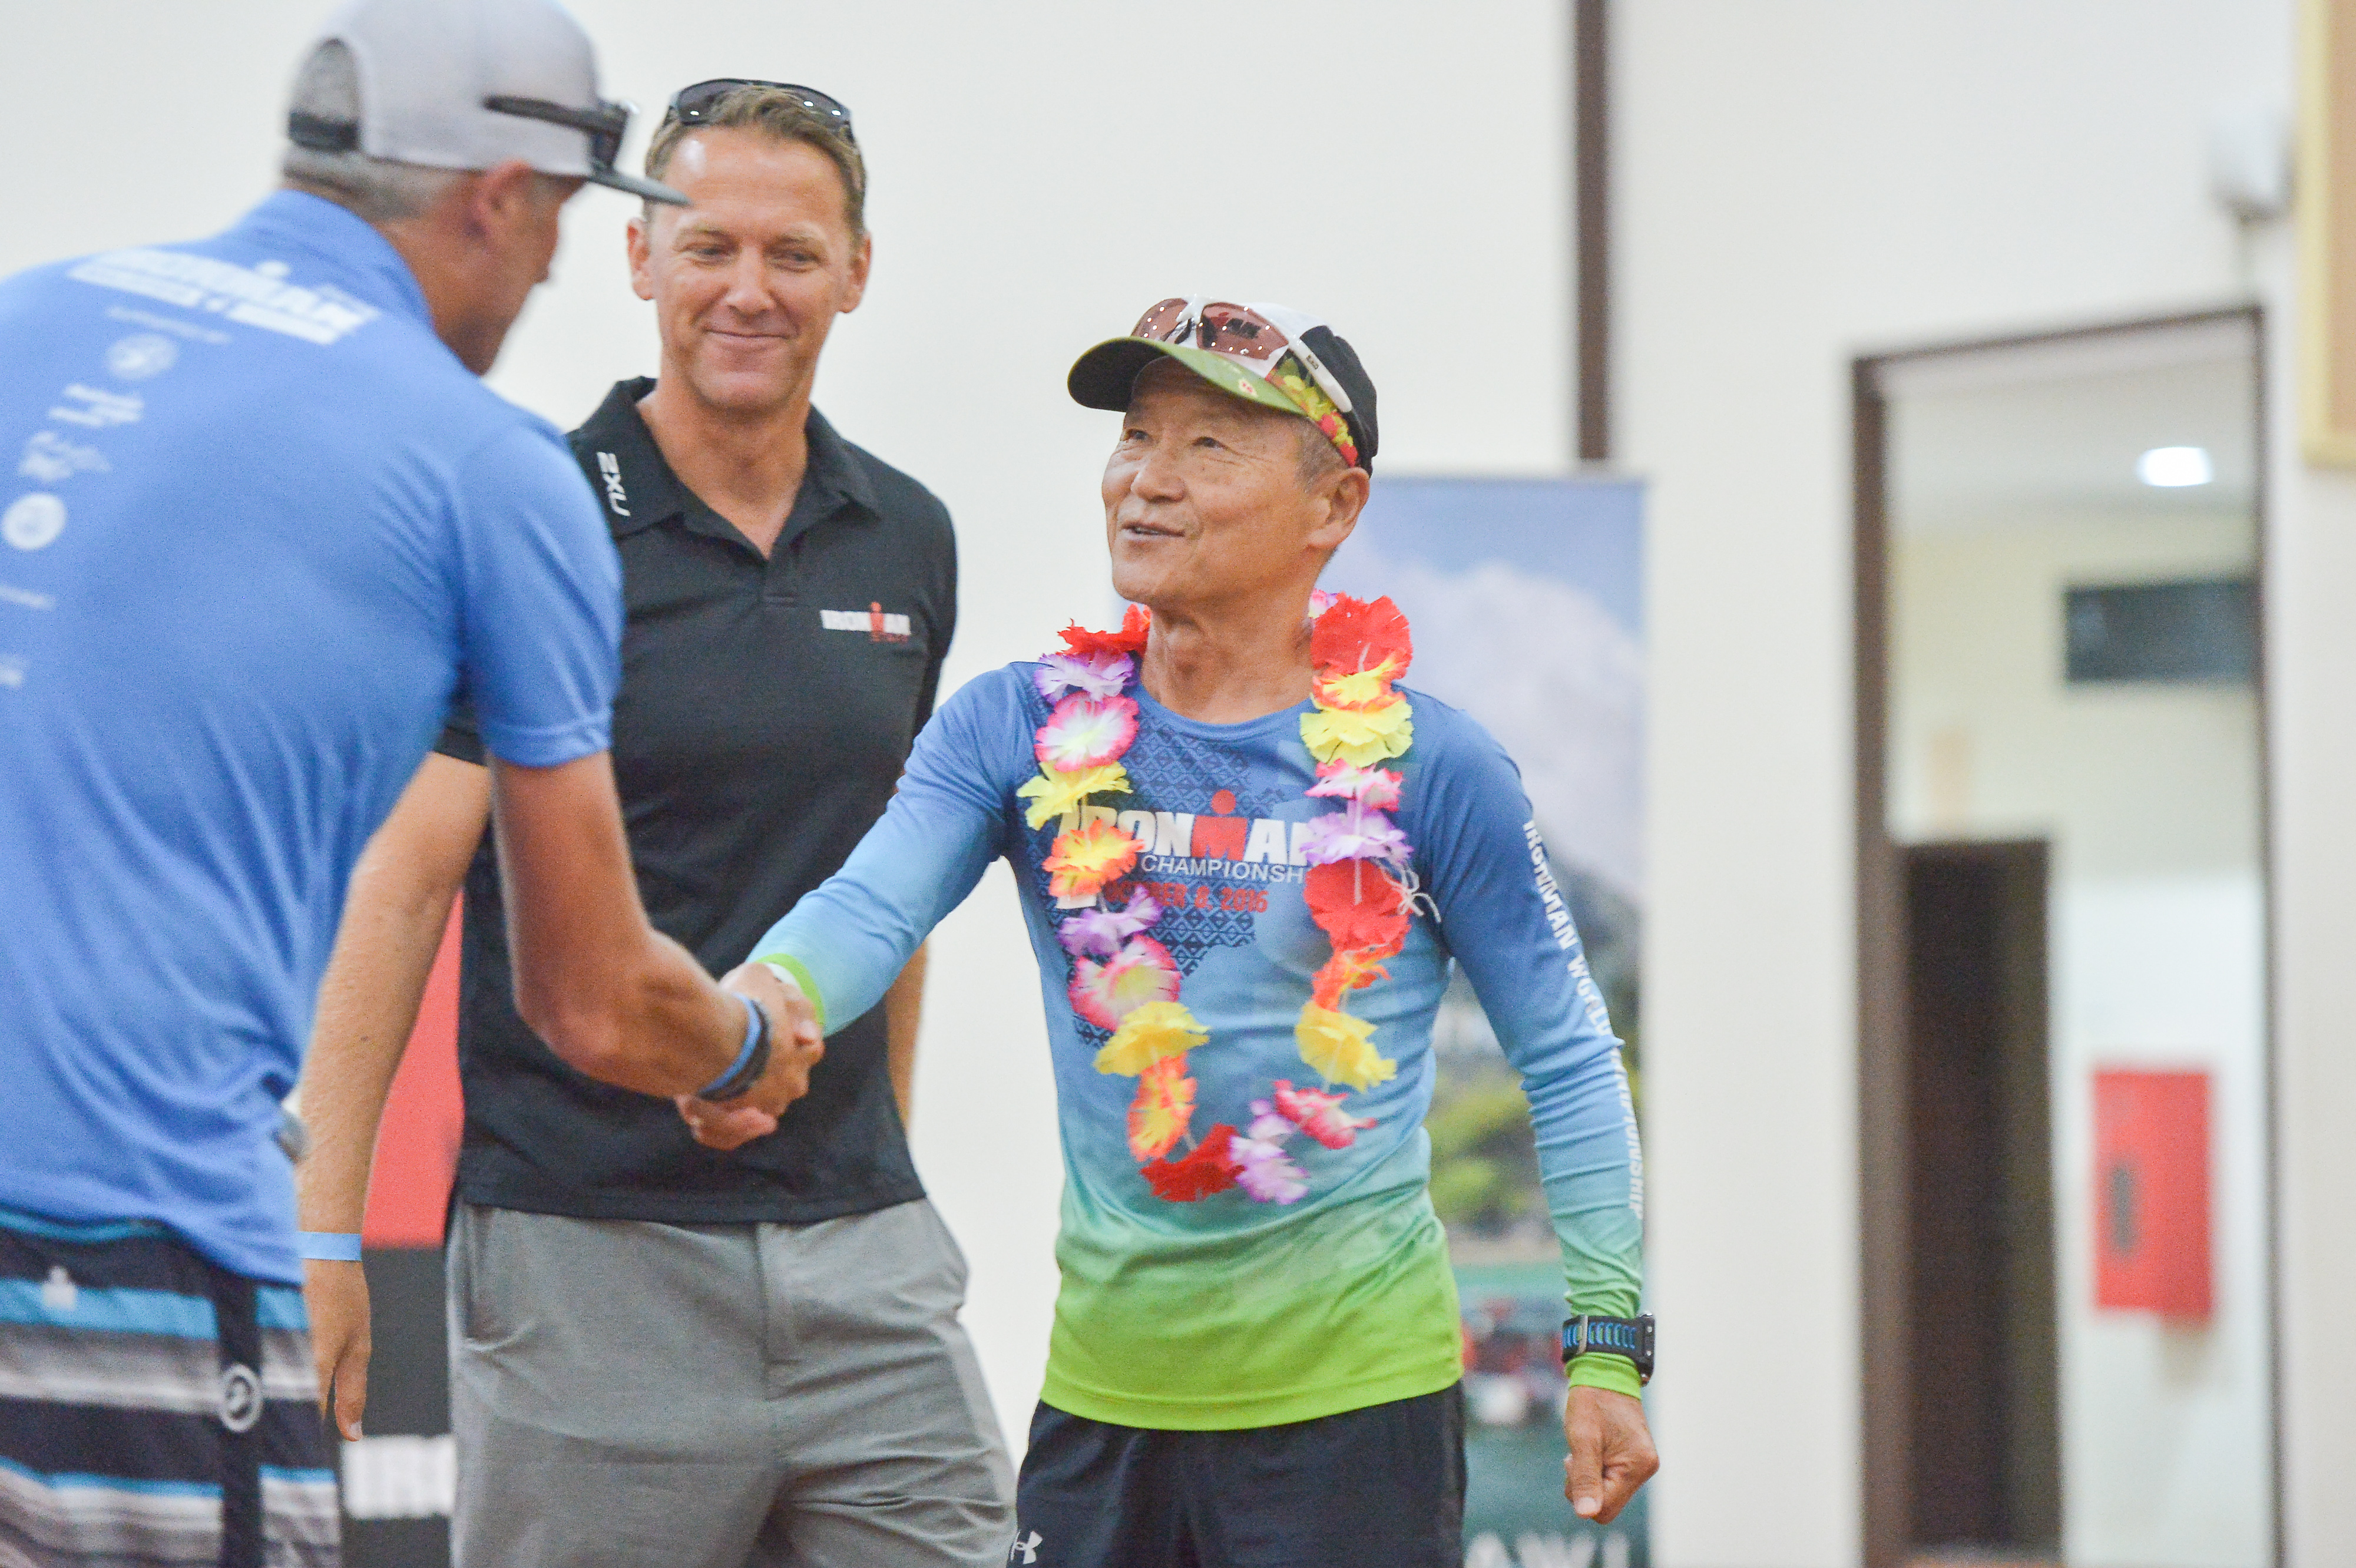 70 year old Japanese, Yoshihito Munemasa qualifies for the Ironman World Championship for the sixth time. 